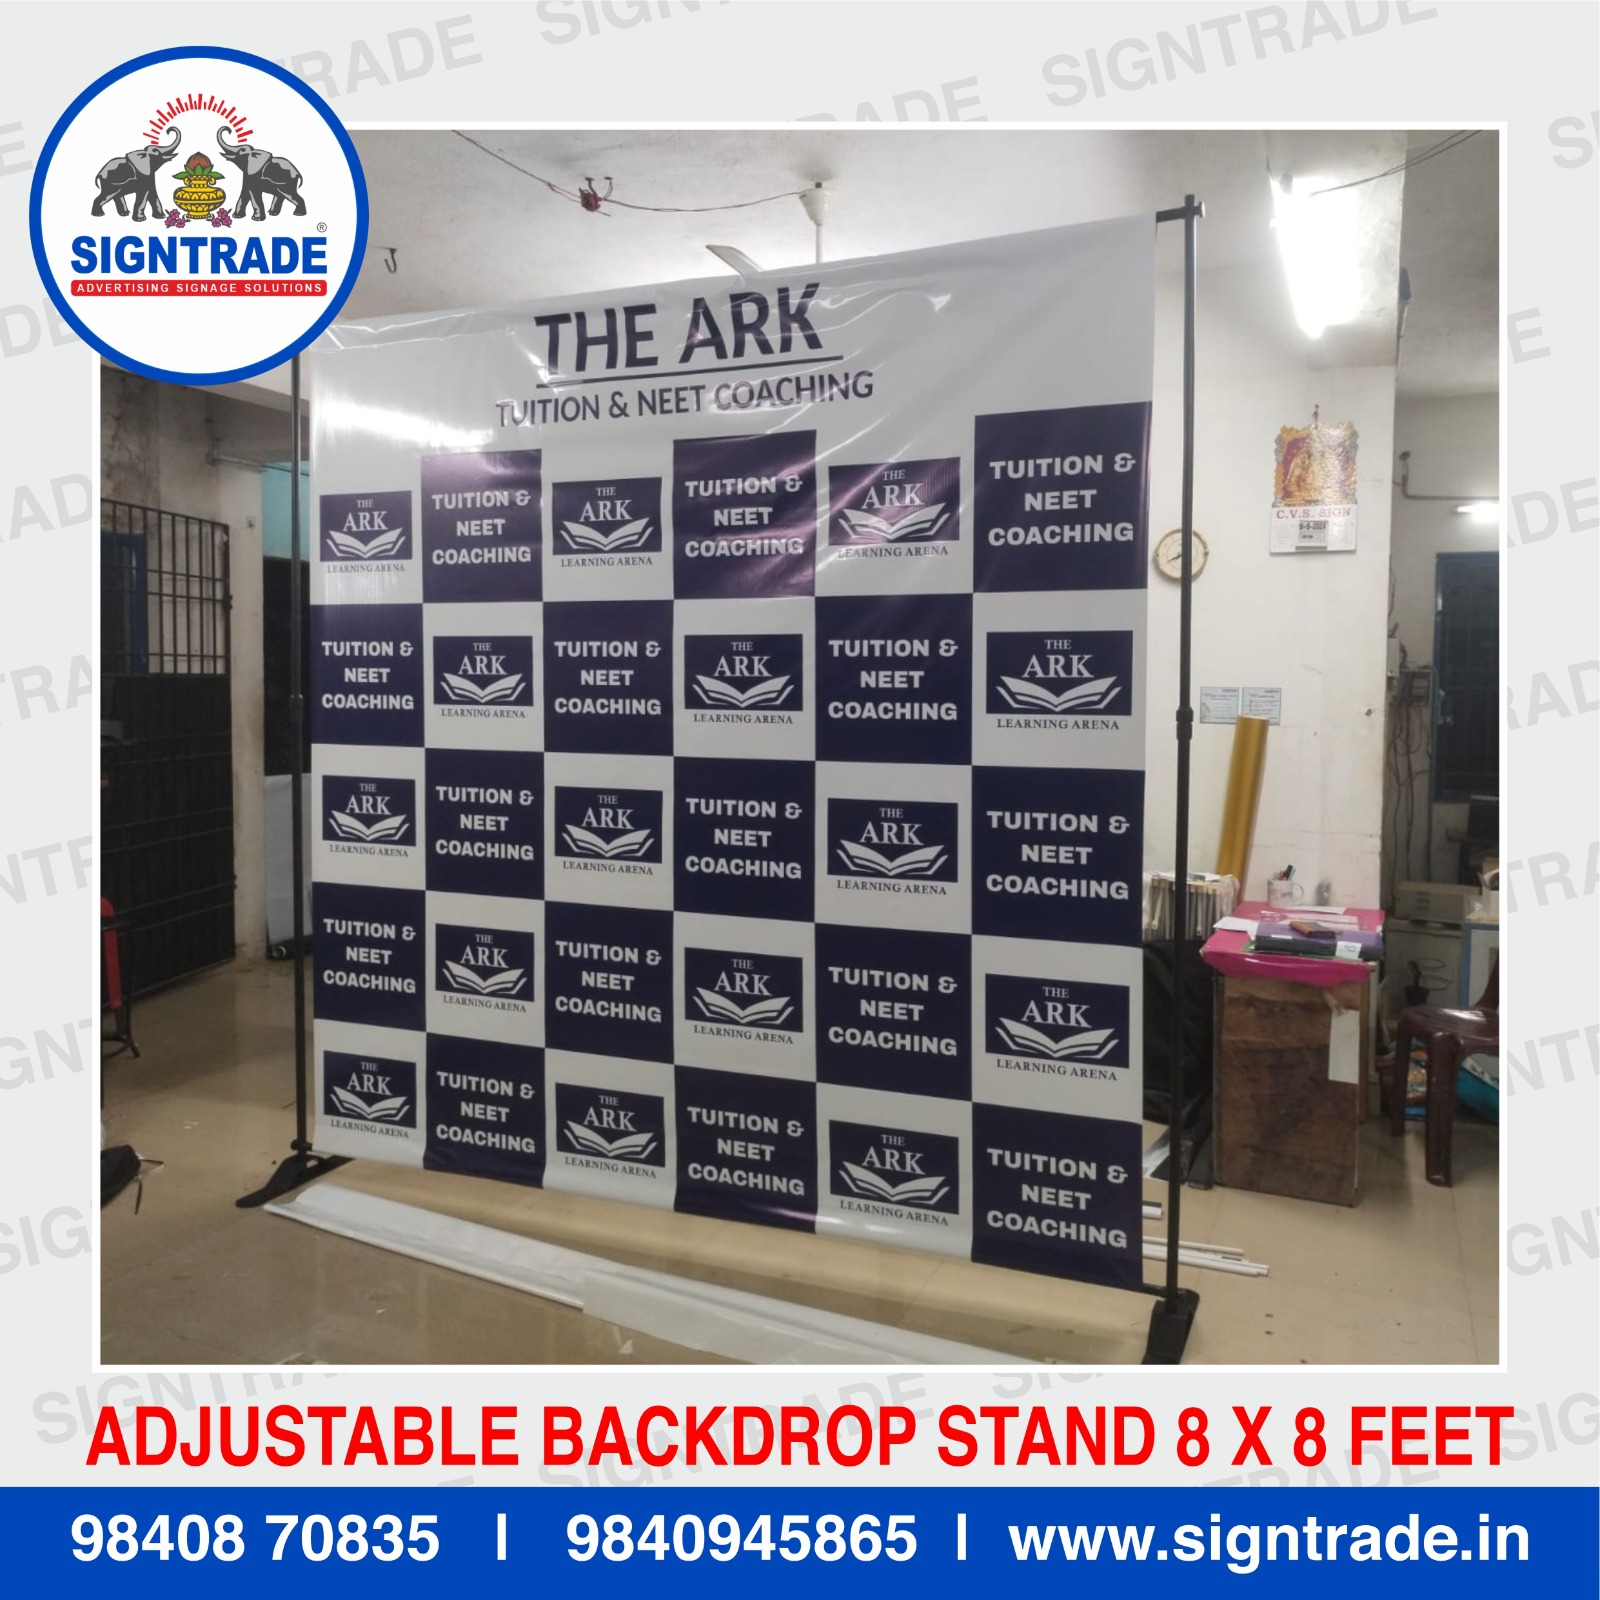 Adjustable Backdrop Standee in Chennai